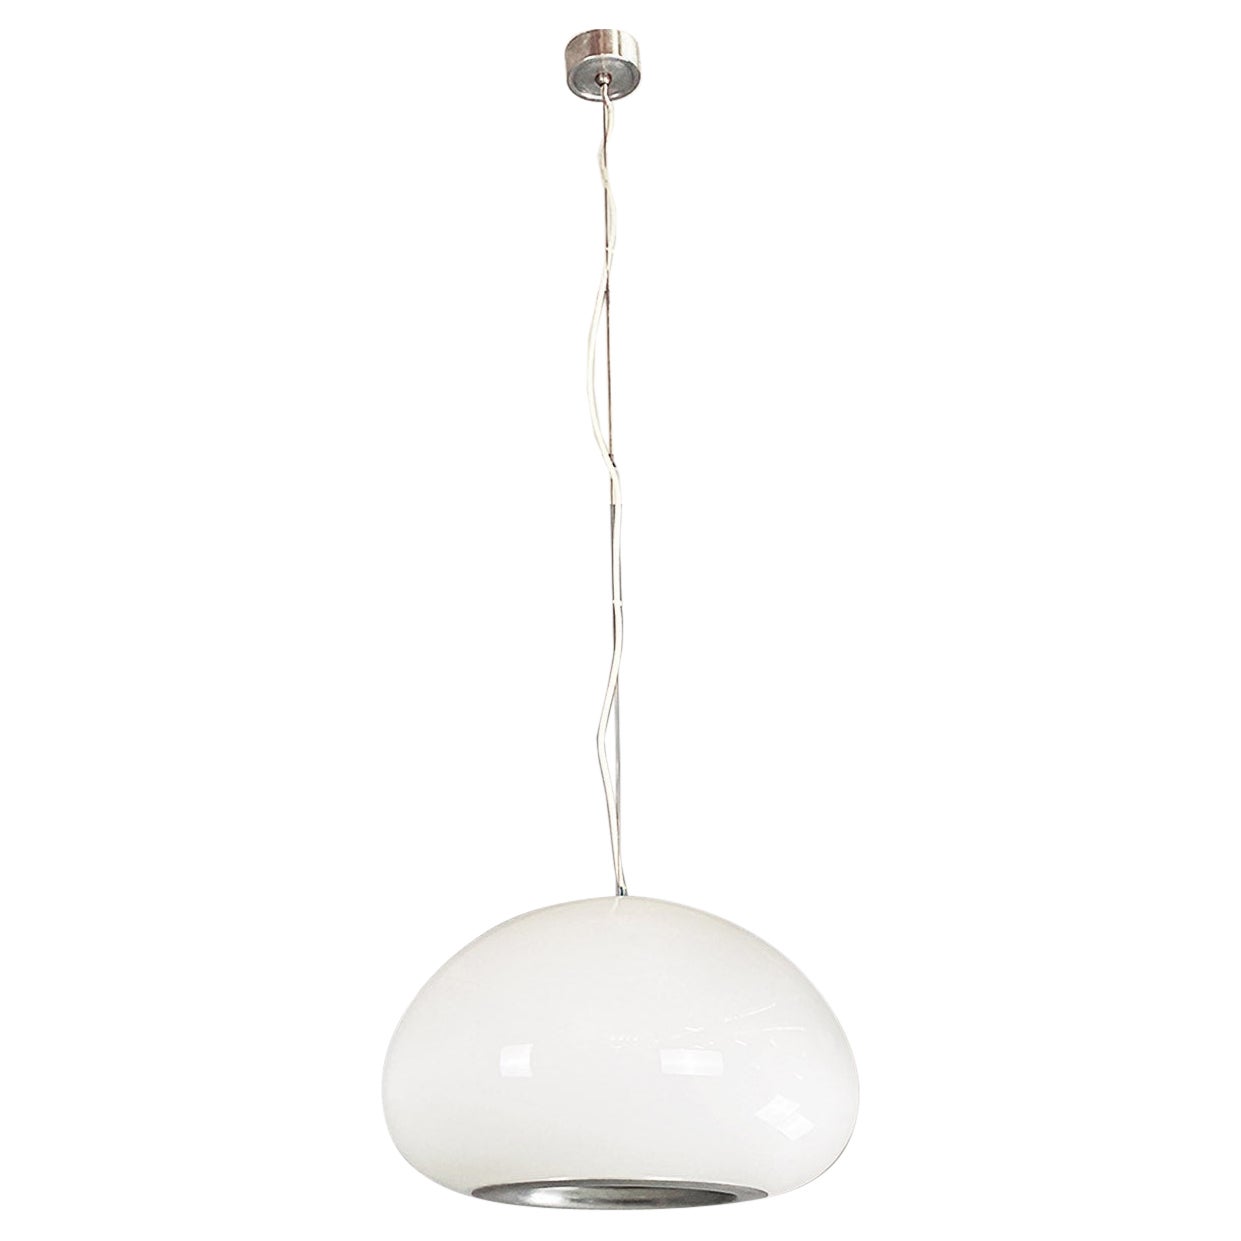 Italian modern Black and White chandelier by Castiglioni brothers, Flos 1965